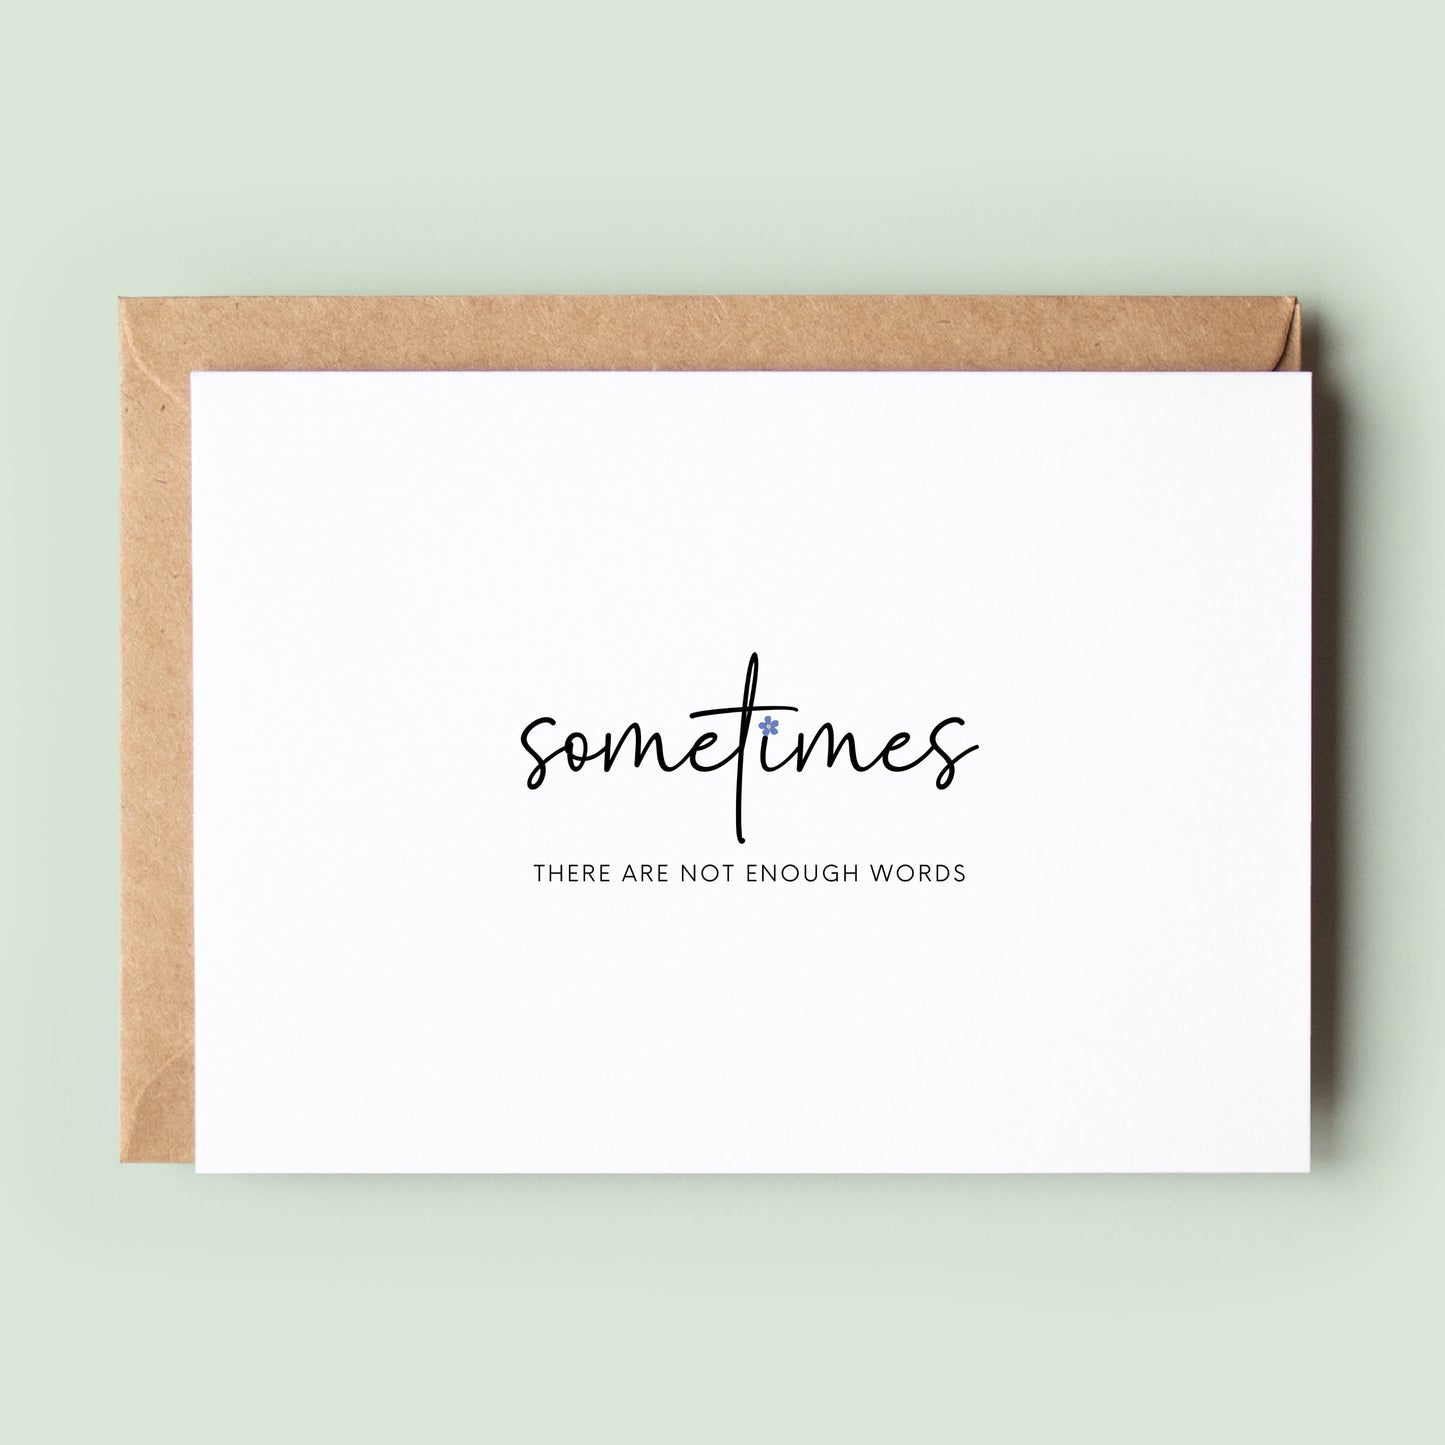 Sometimes There Are Not Enough Words, Sympathy Card, Encouragement Card, Condolence Card, Bereavement Card, Thinking of You - #199